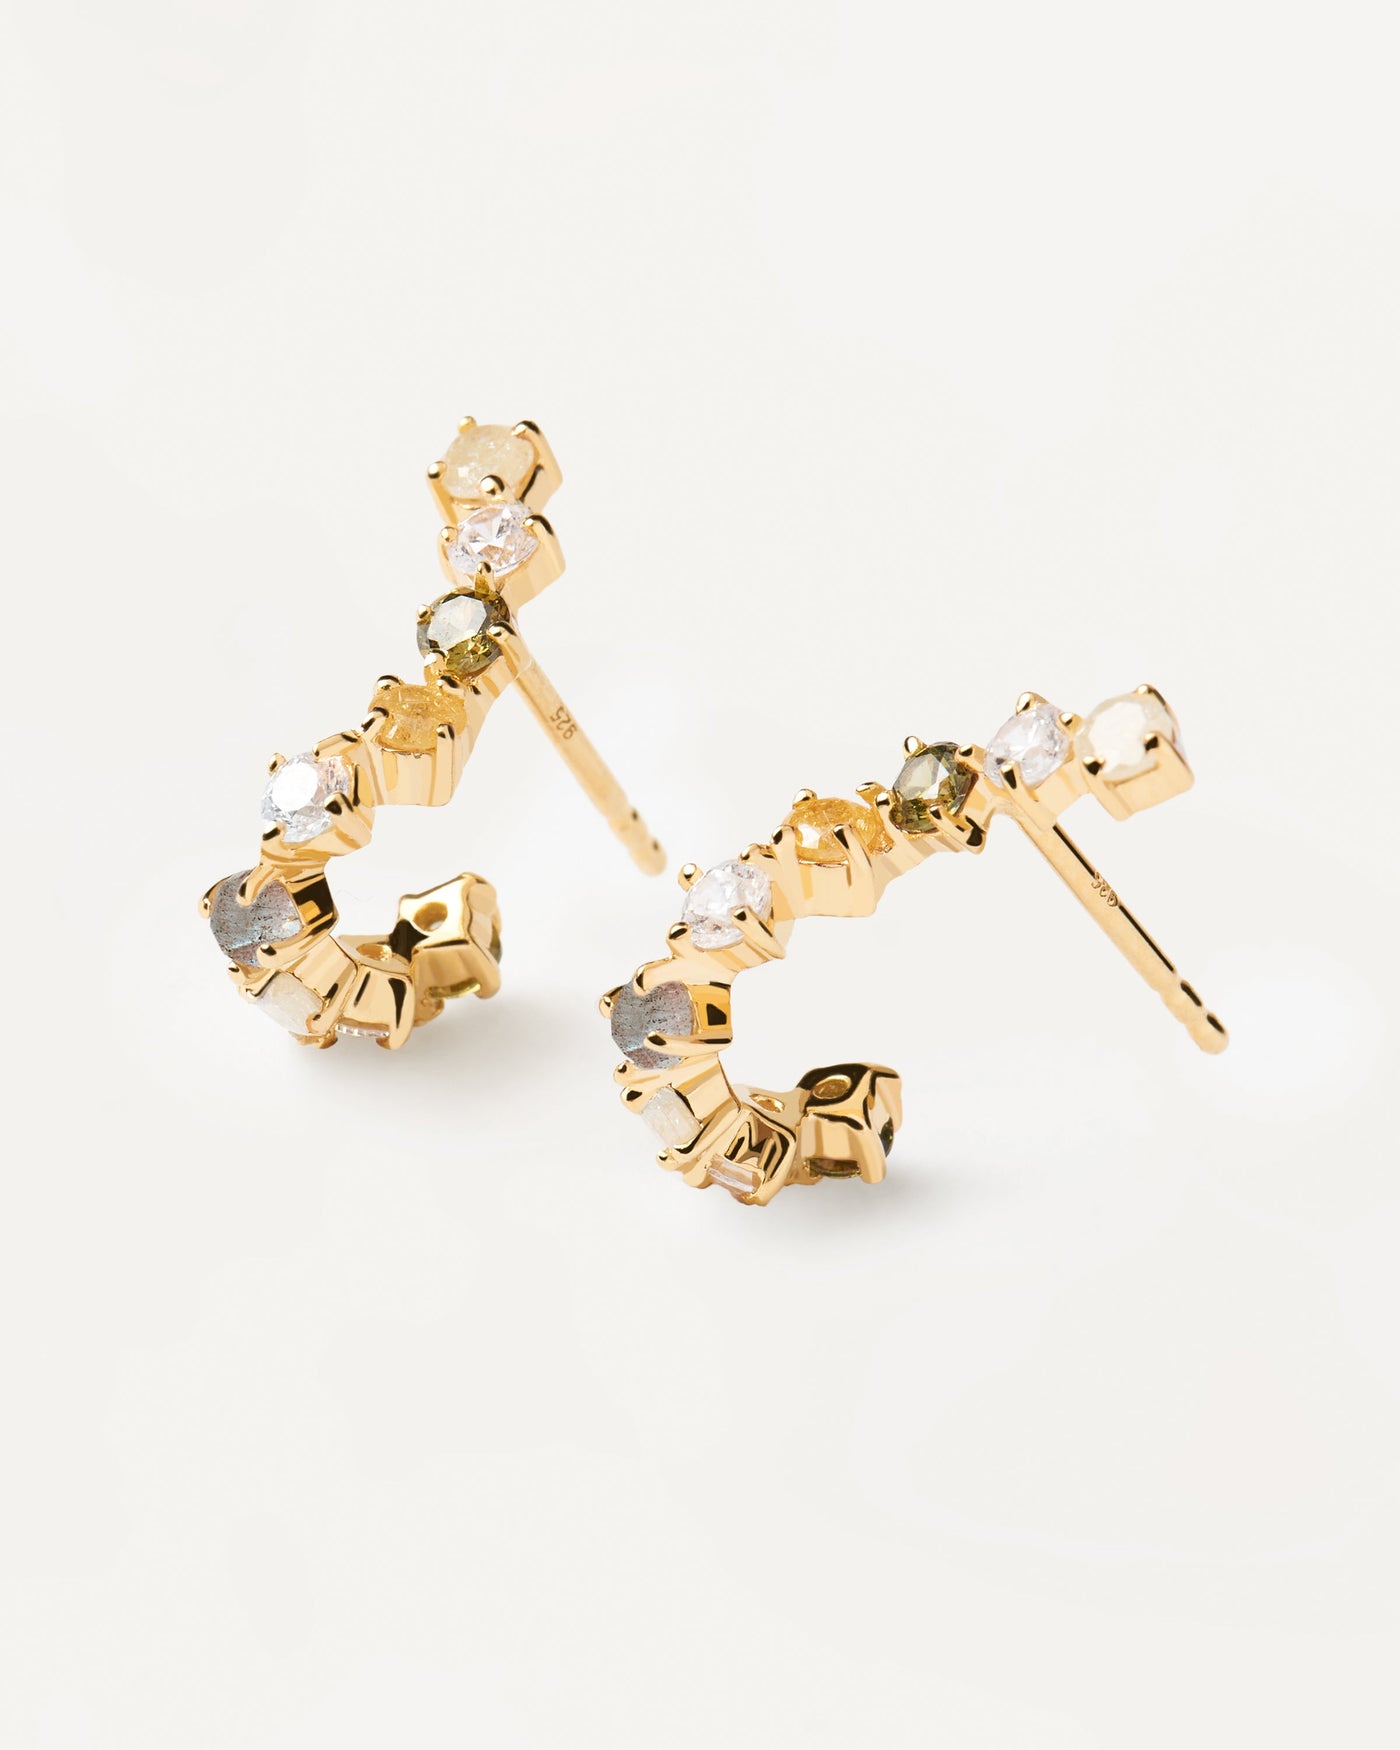 2023 Selection | Tuscany Earrings. Gold-plated wavy huggie earrings with zirconias. Get the latest arrival from PDPAOLA. Place your order safely and get this Best Seller. Free Shipping.